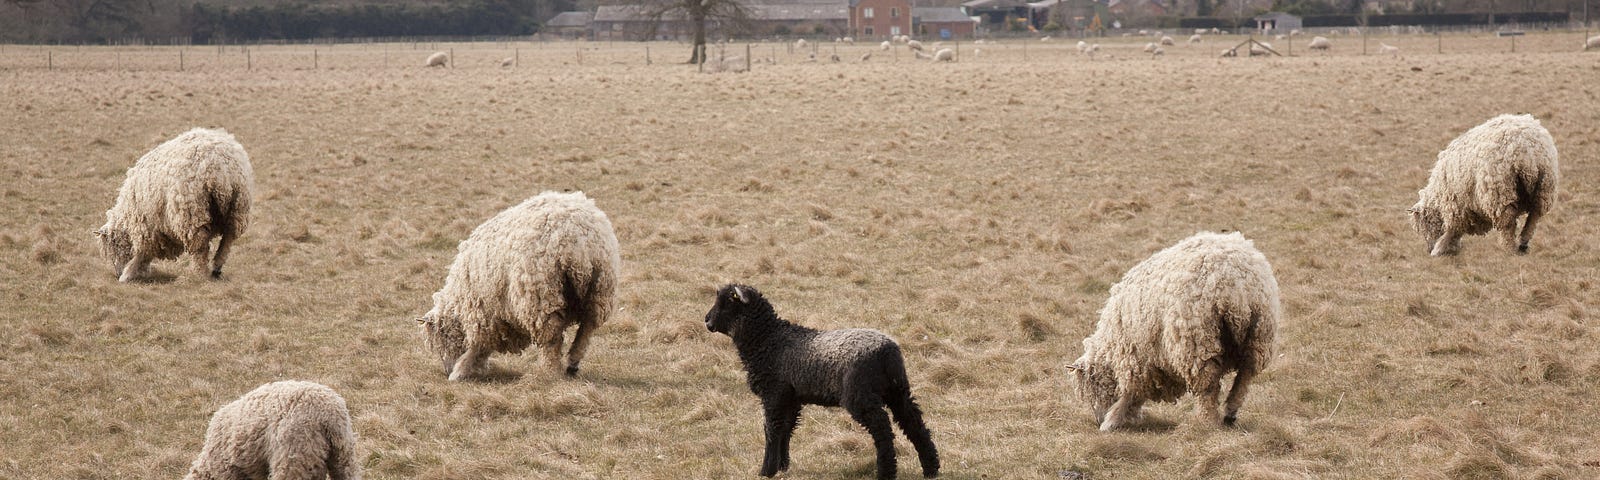 Several white sheep and one black sheep grazine in a dry brown field on a cold day